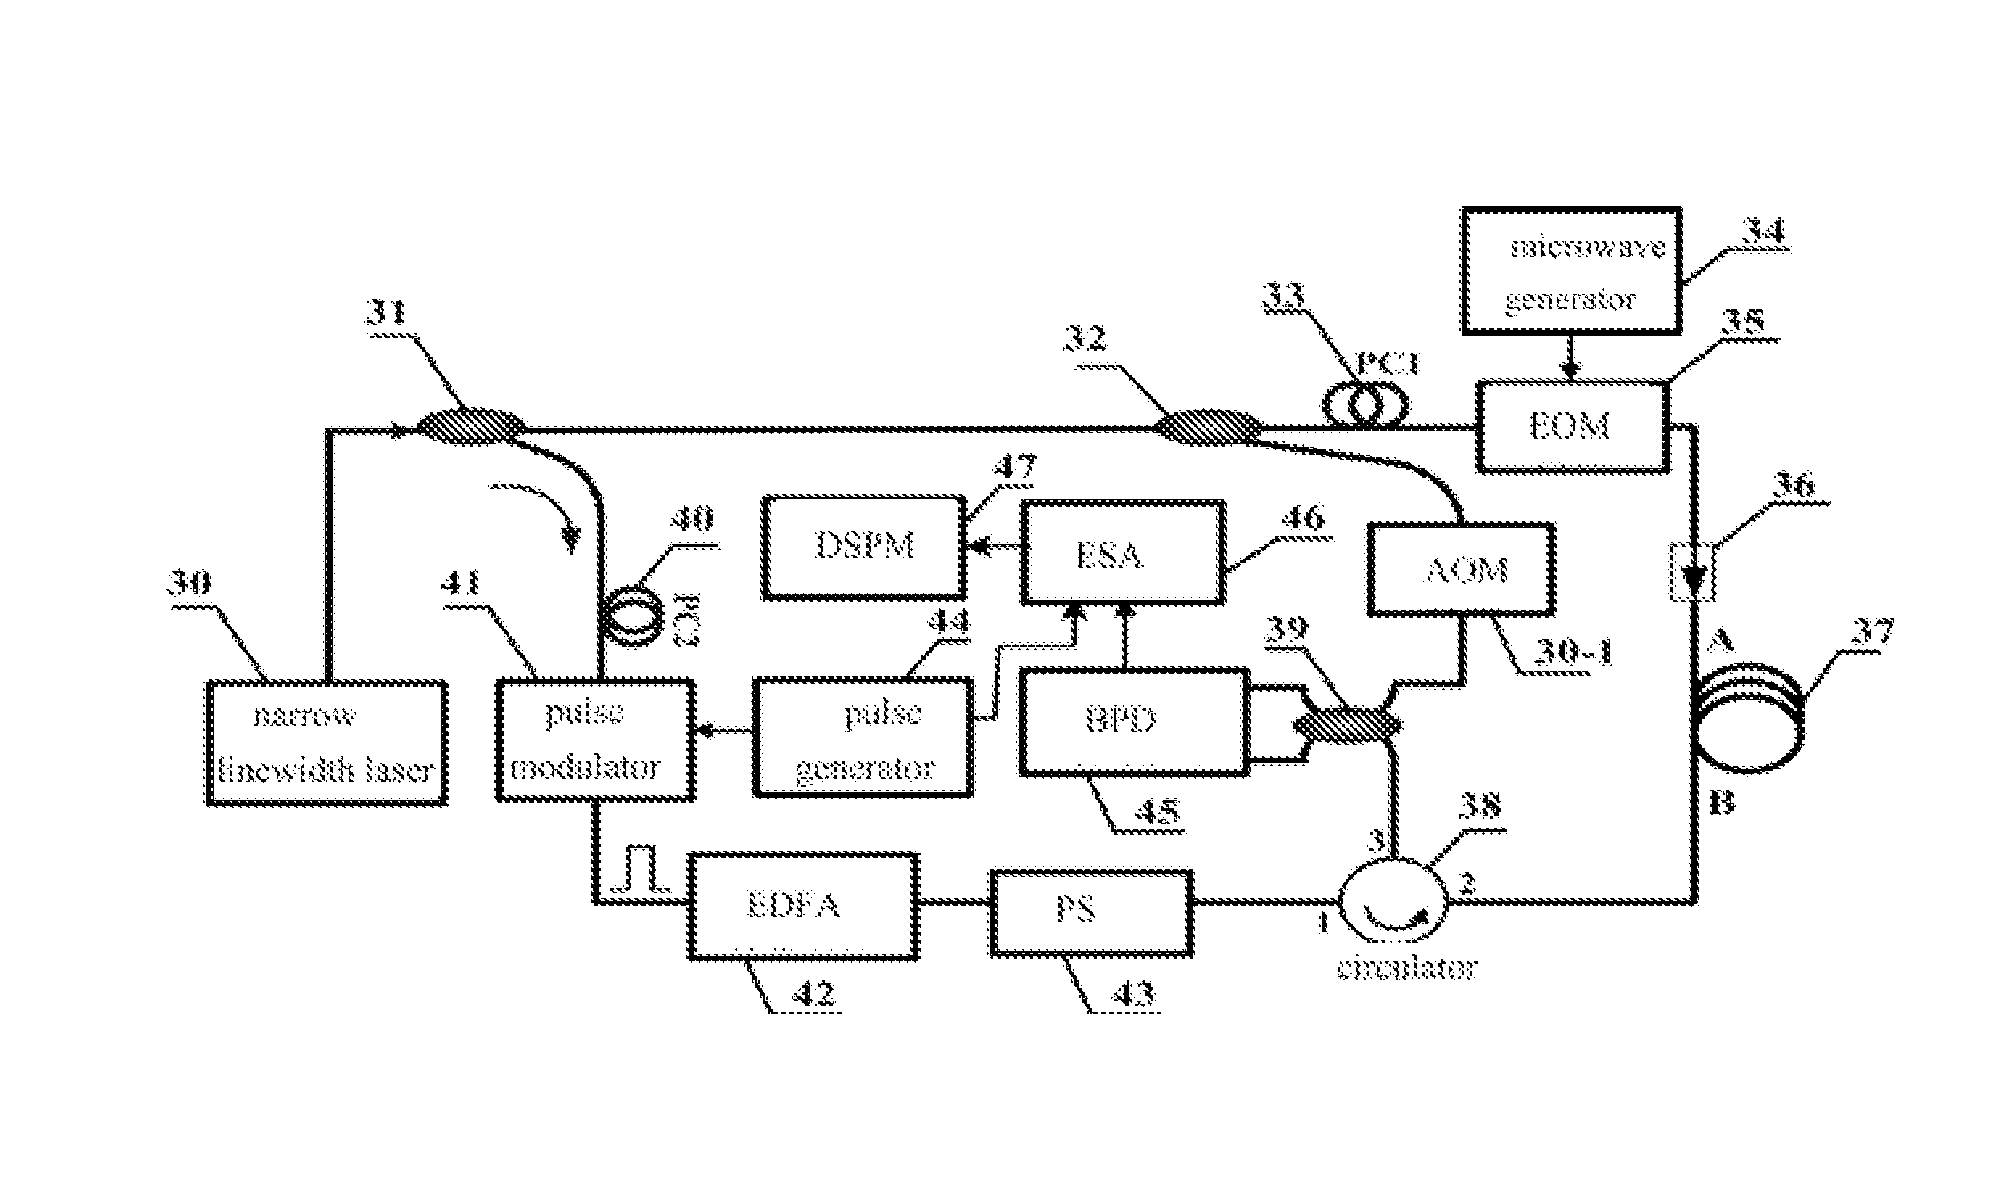 BOTDA System that Combined Optical Pulse Coding Techniques and Coherent Detection